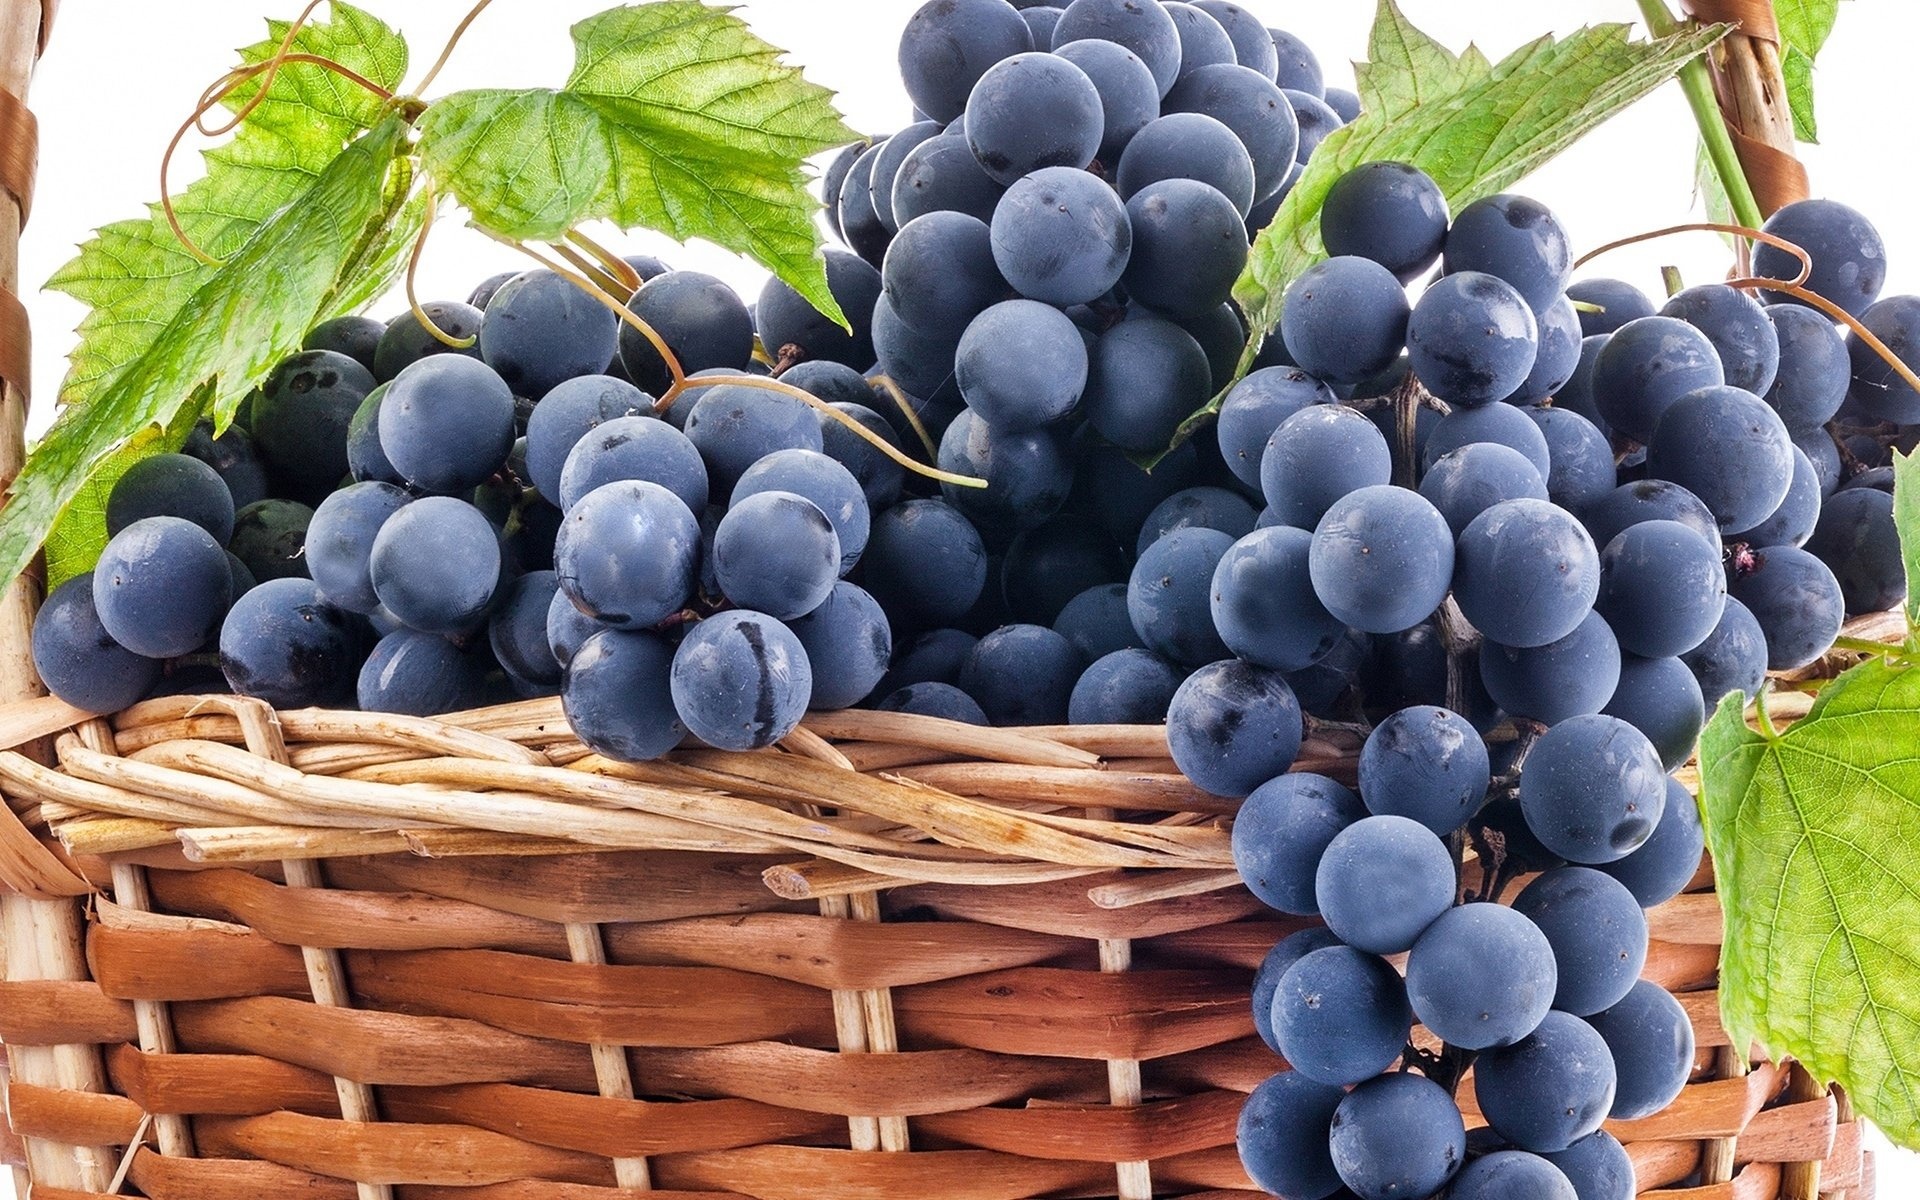 Grapes: An effective remedy for constipation. 1920x1200 HD Wallpaper.